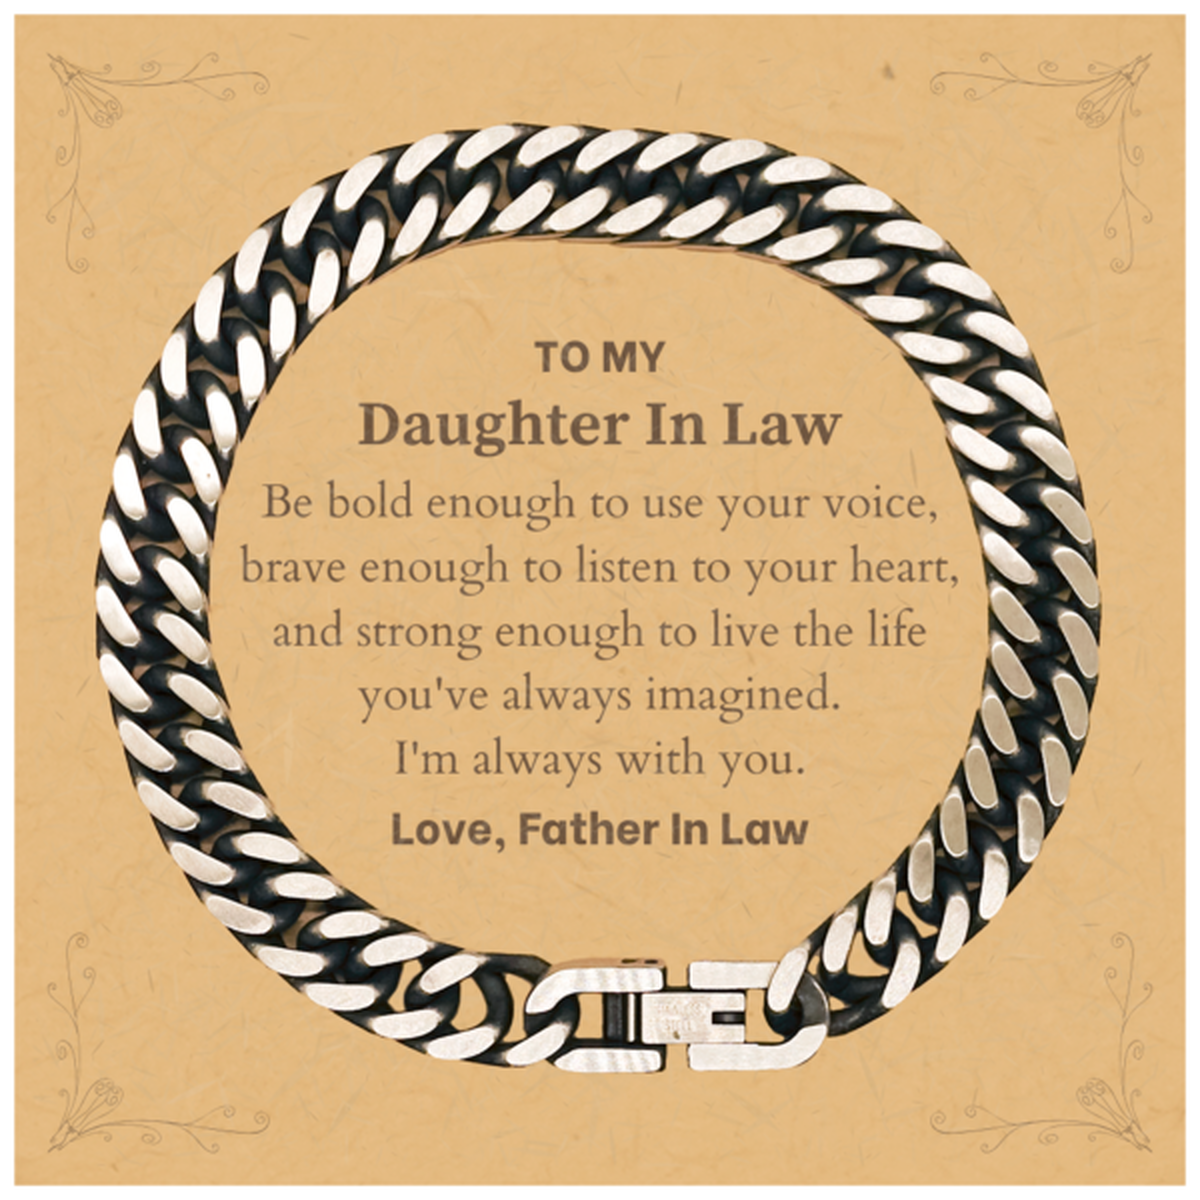 Keepsake Daughter In Law Cuban Link Chain Bracelet Gift Idea Graduation Christmas Birthday Daughter In Law from Father In Law, Daughter In Law Be bold enough to use your voice, brave enough to listen to your heart. Love, Father In Law